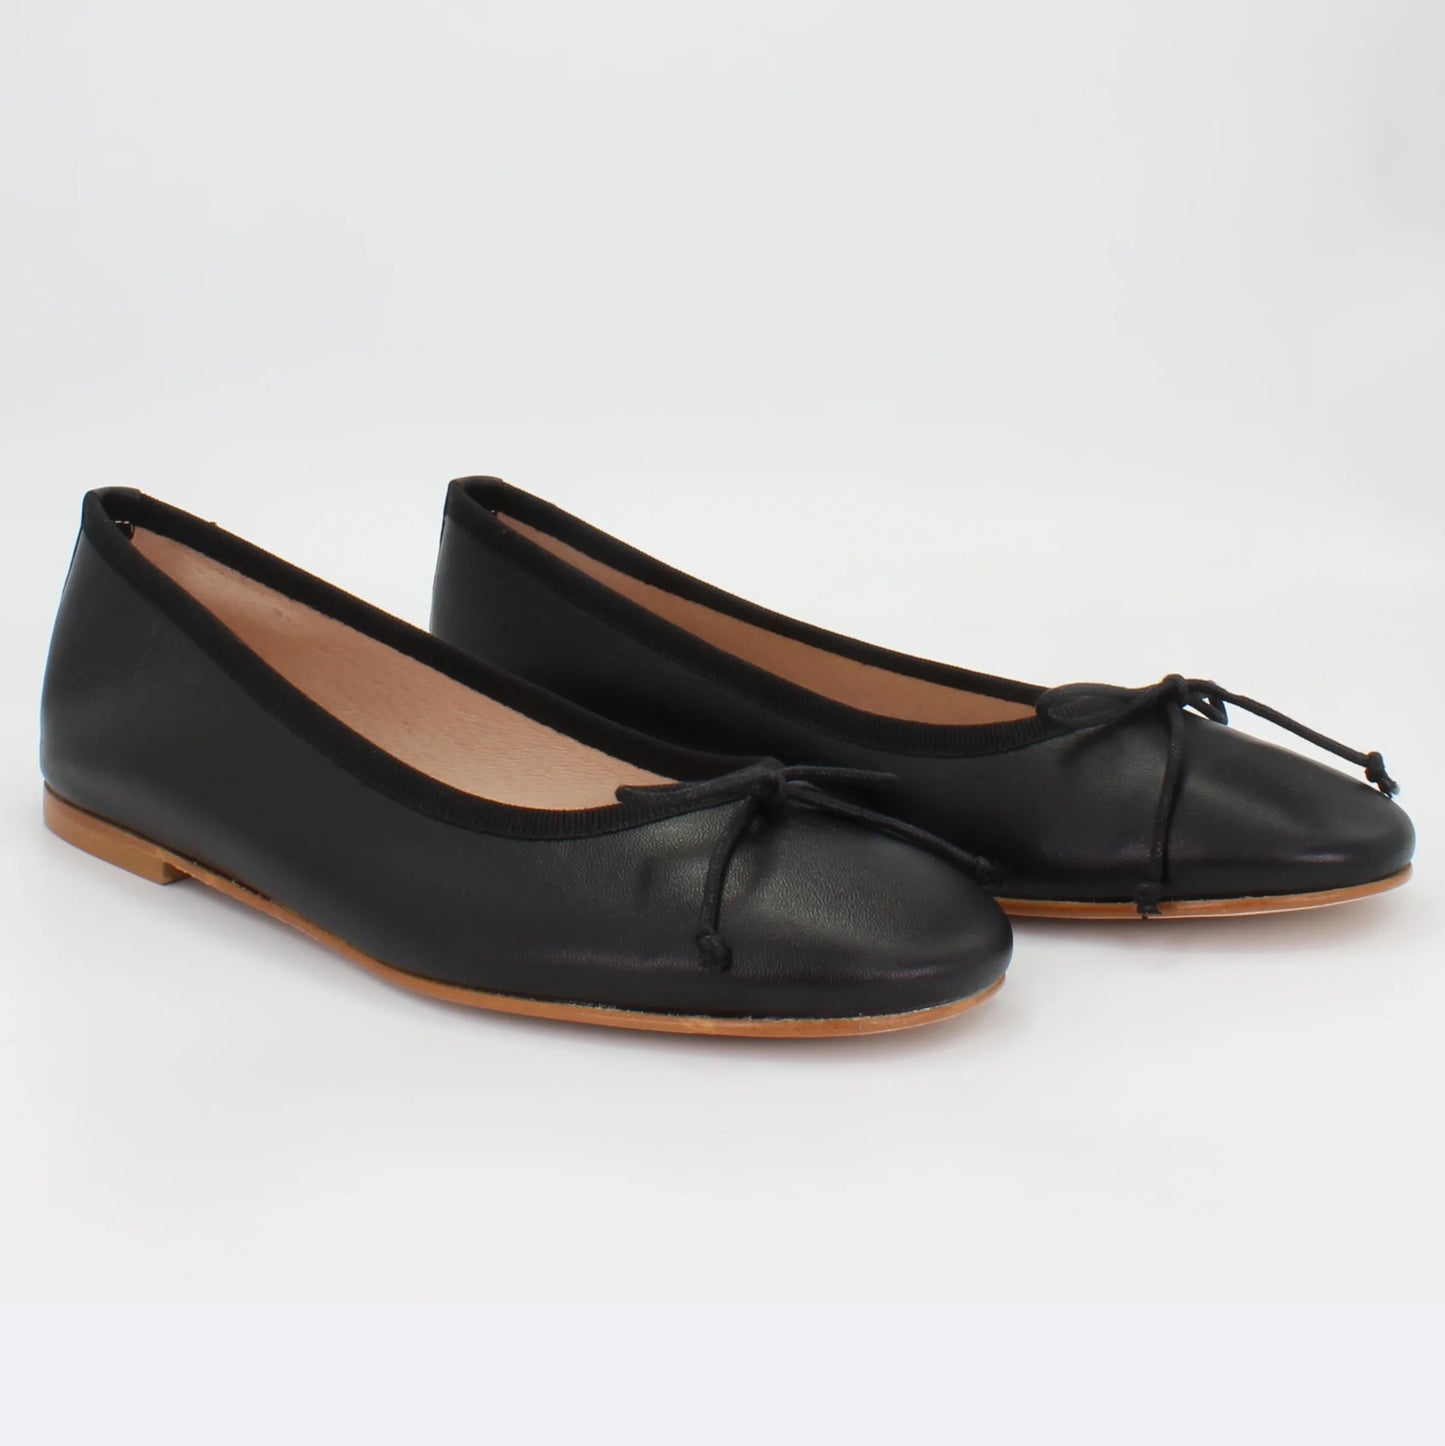 Shop Handmade Italian Leather ballerina pump in nero (E429) or browse our range of hand-made Italian shoes in leather or suede in-store at Aliverti Cape Town, or shop online. We deliver in South Africa & offer multiple payment plans as well as accept multiple safe & secure payment methods.